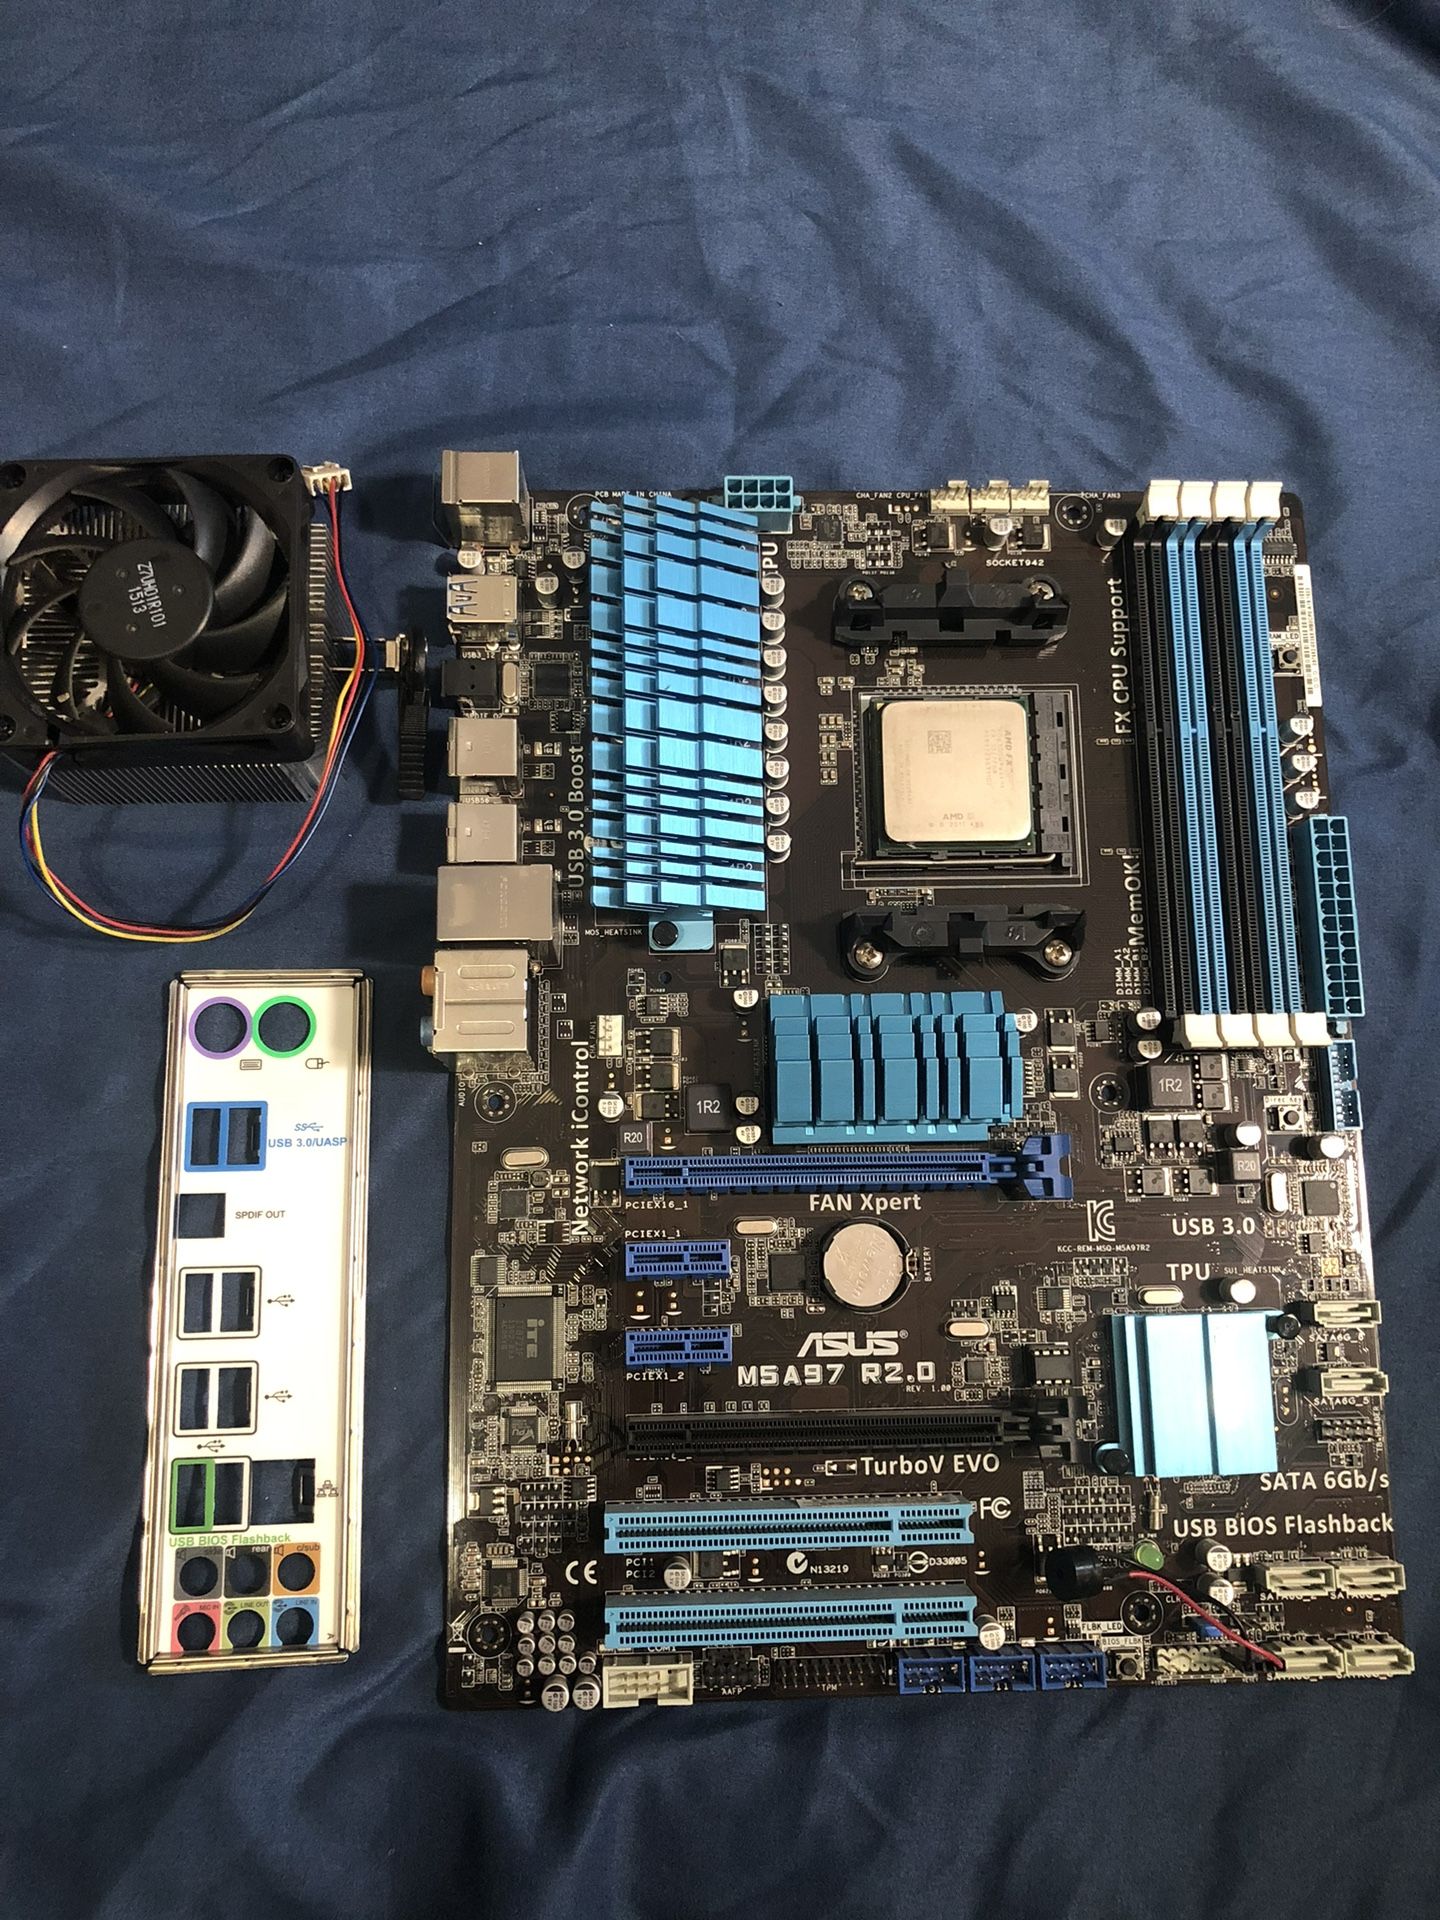 FX 6300 ASUS M5A97 LE R2.0 AM3+ Motherboard CPU Combo